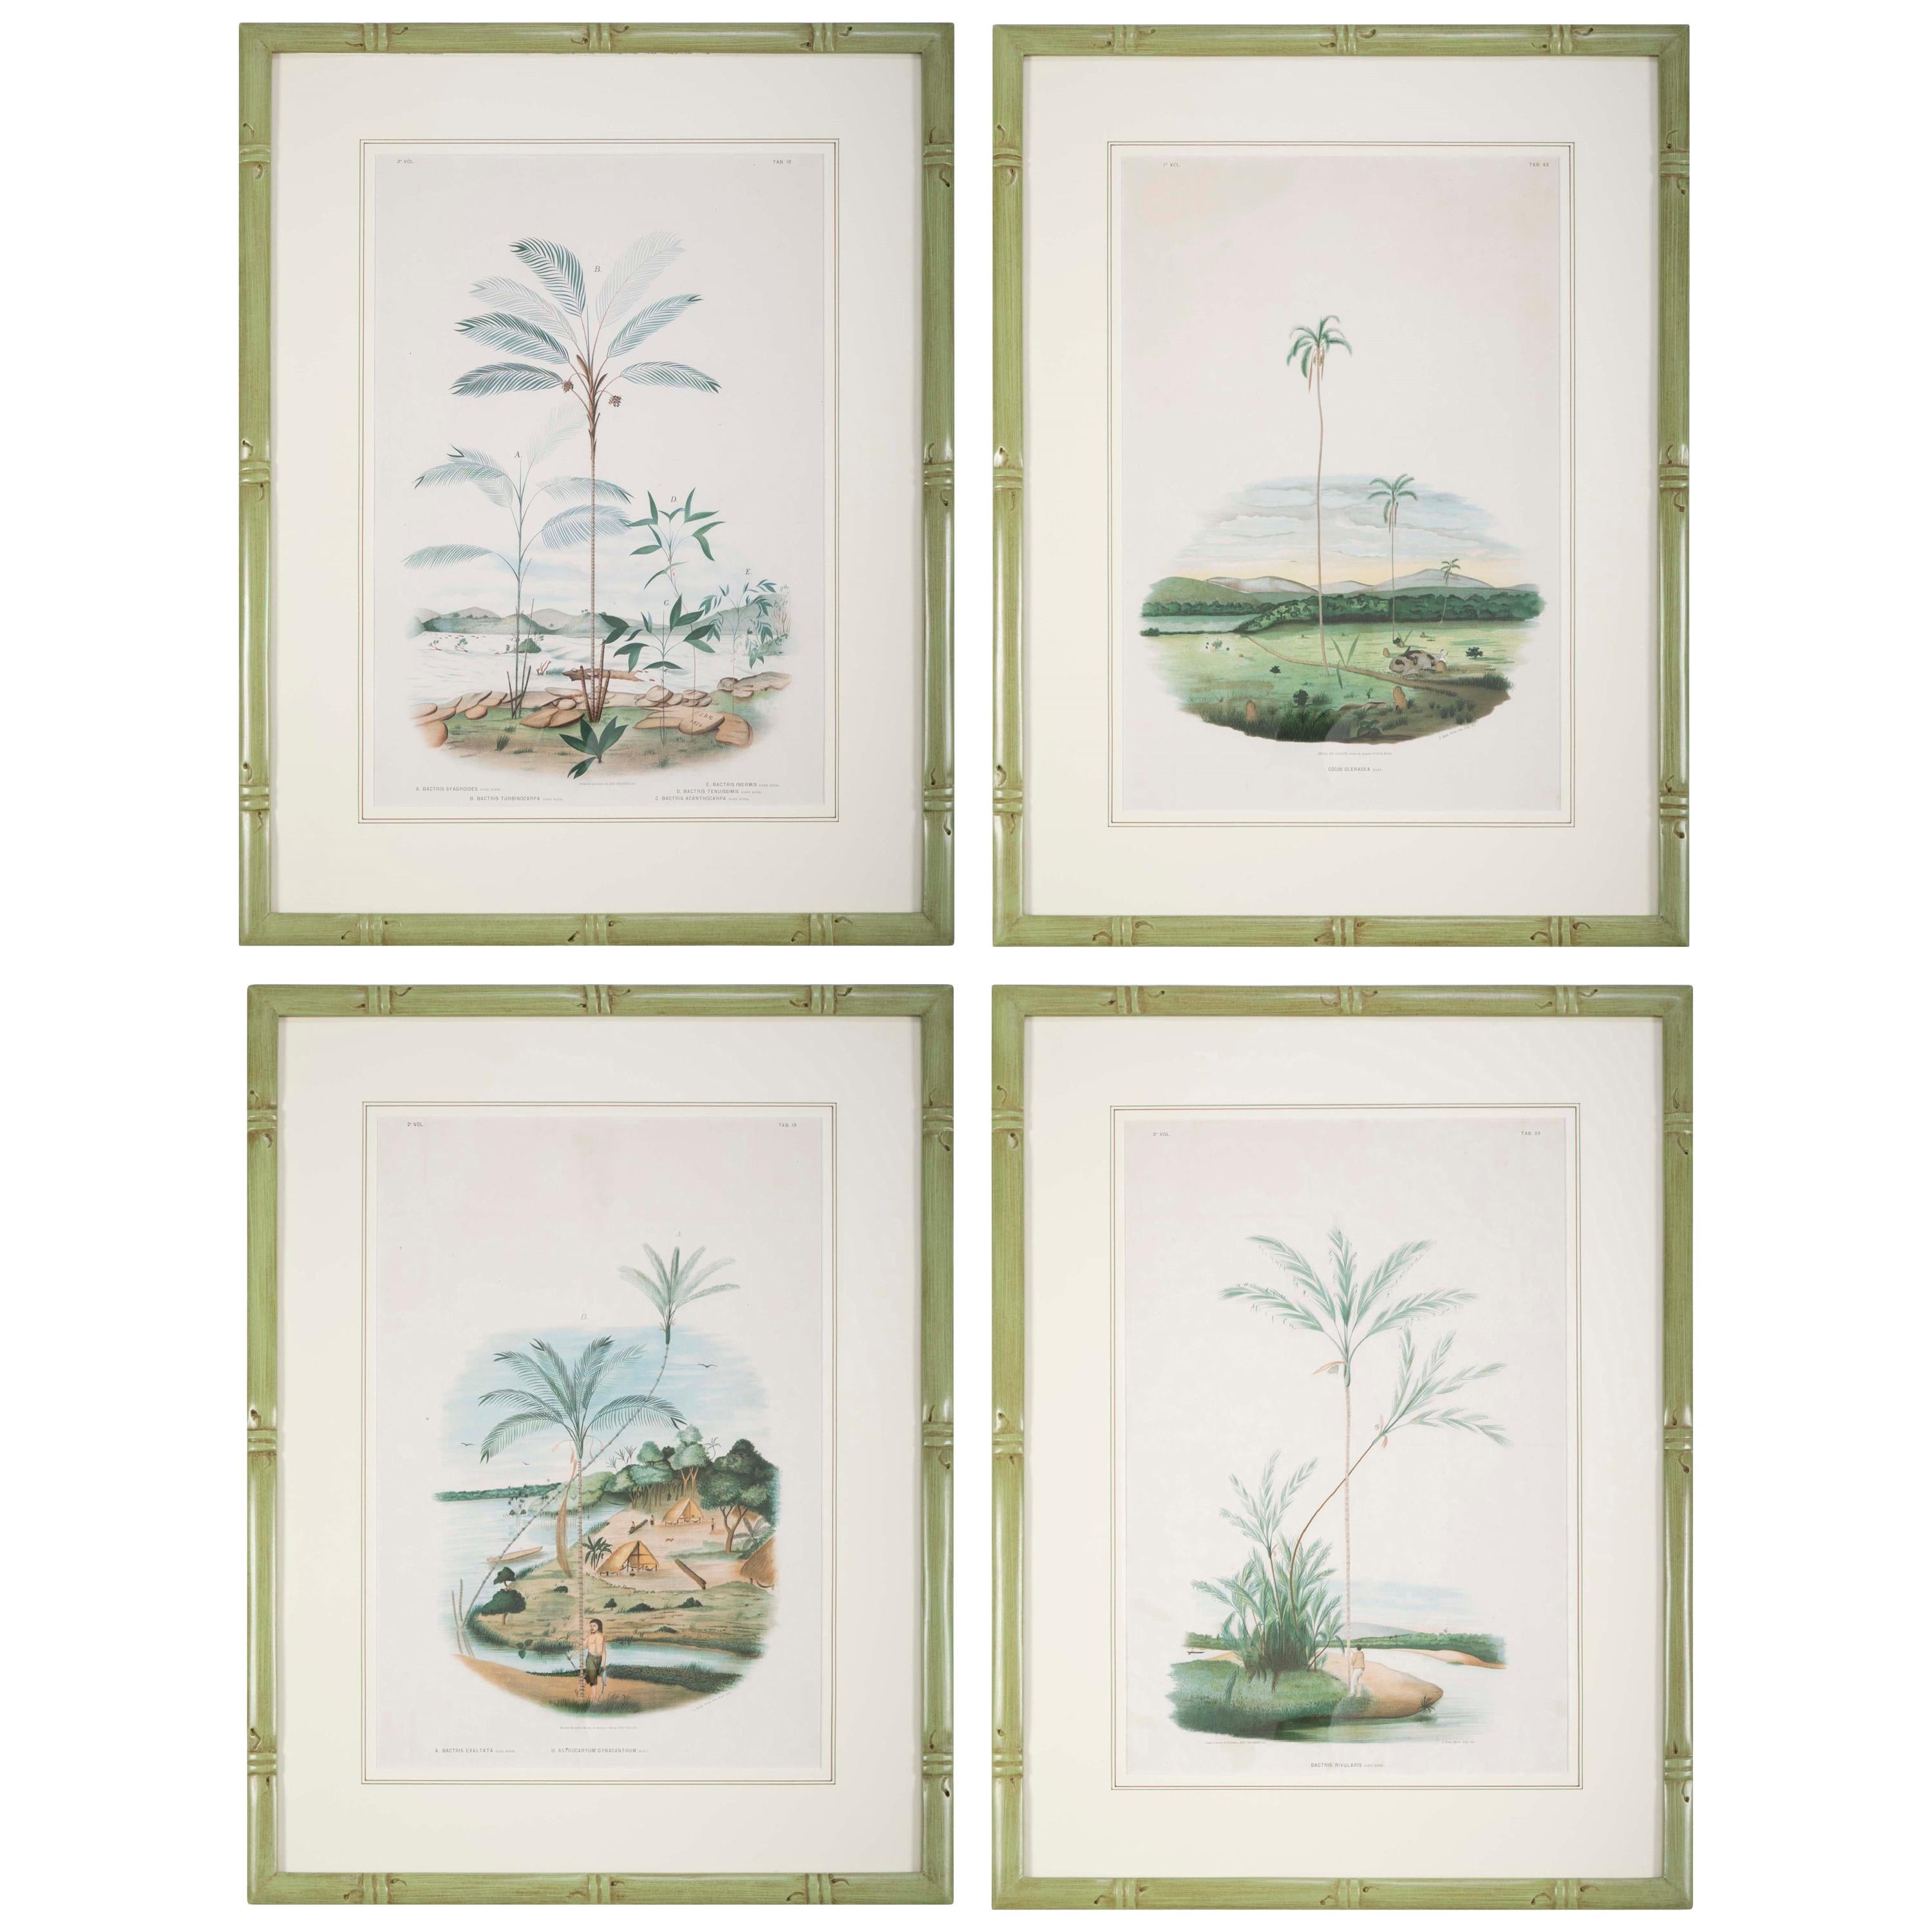 Set of Four Chromolithographs of Brazilian Palms by Joao Barbosa Rodrigues